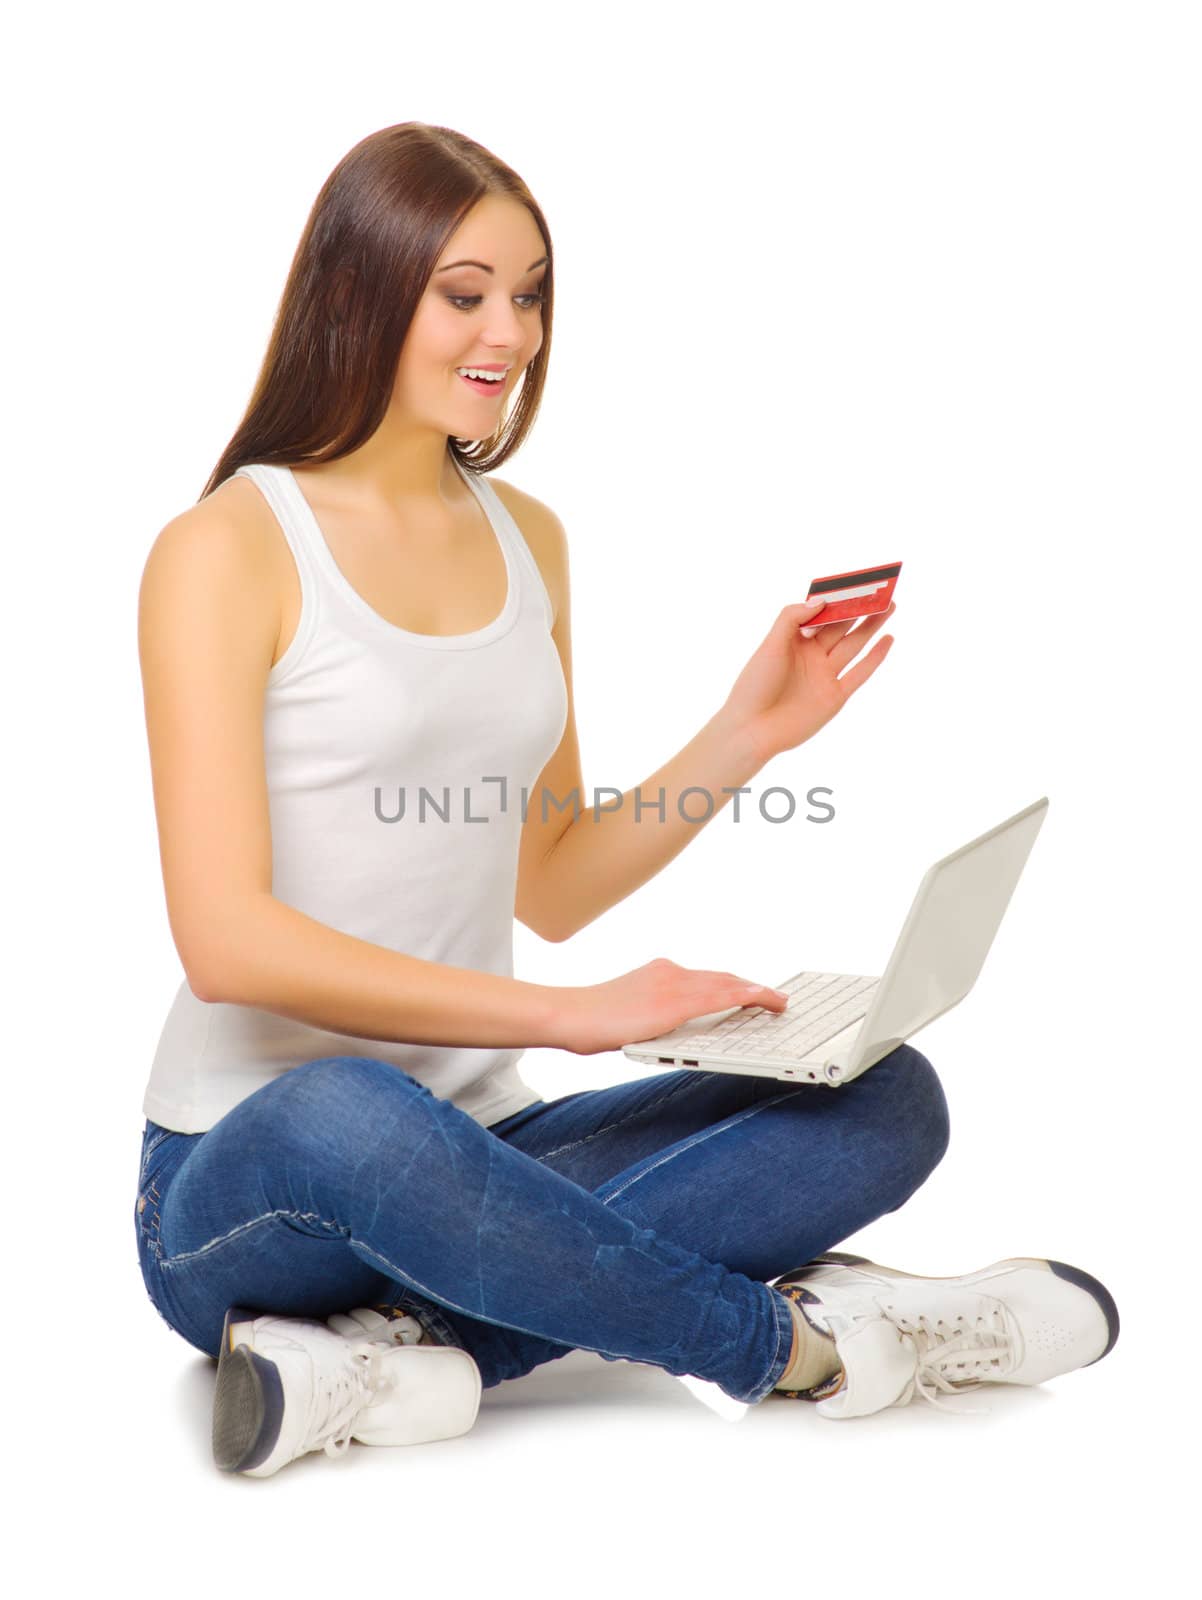 Young girl with laptop and credit card by rbv